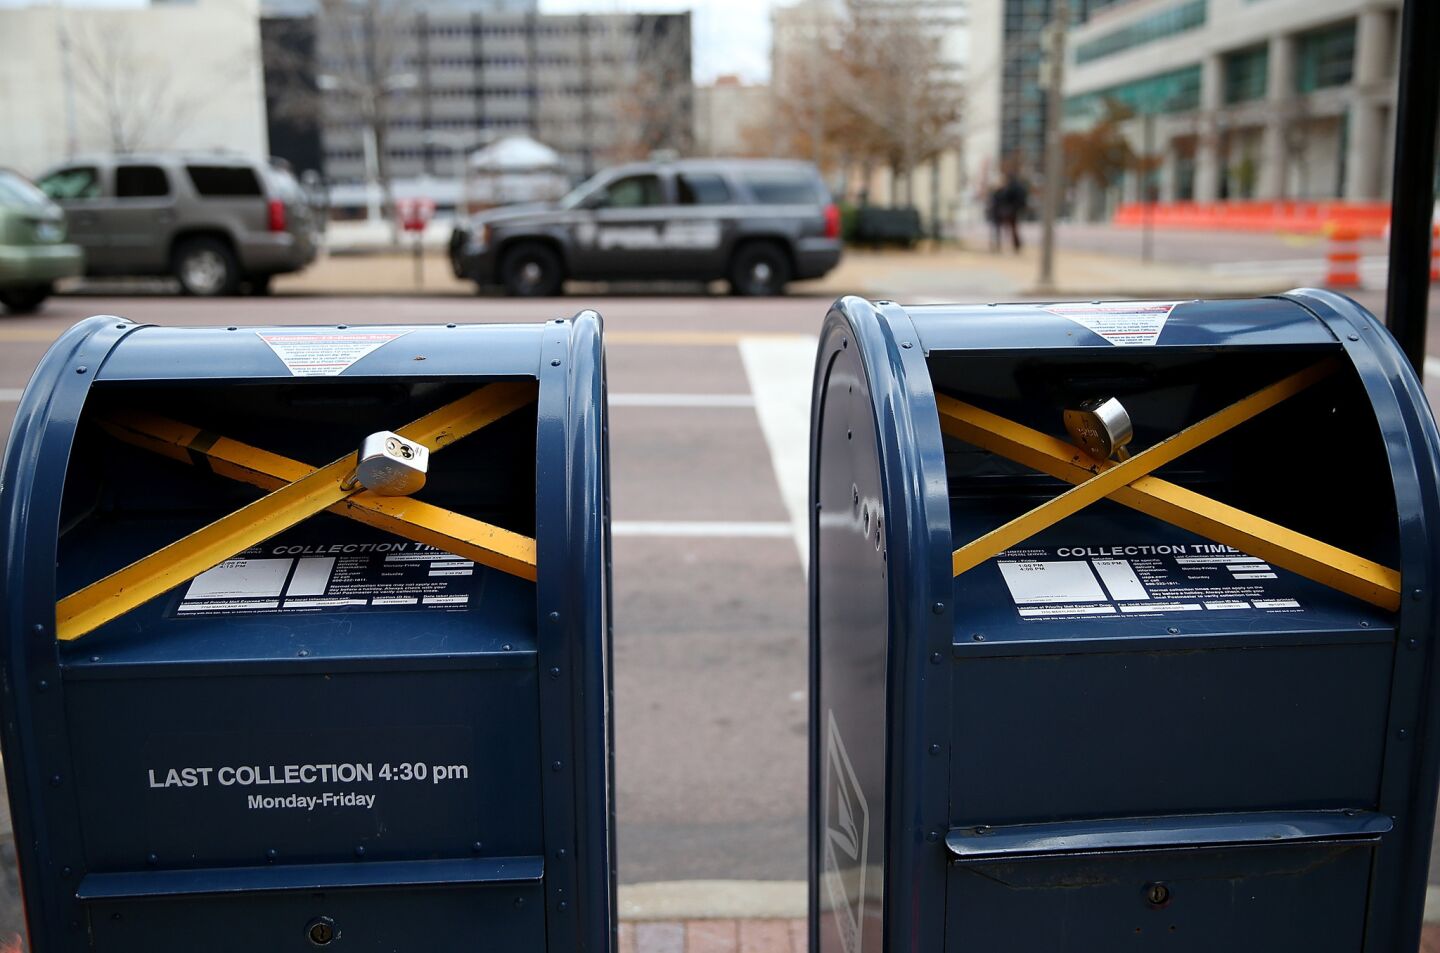 Locks are seen on mailboxes across from the Buzz Westfall Justice Center where the grand jury convened in Clayton, Mo.